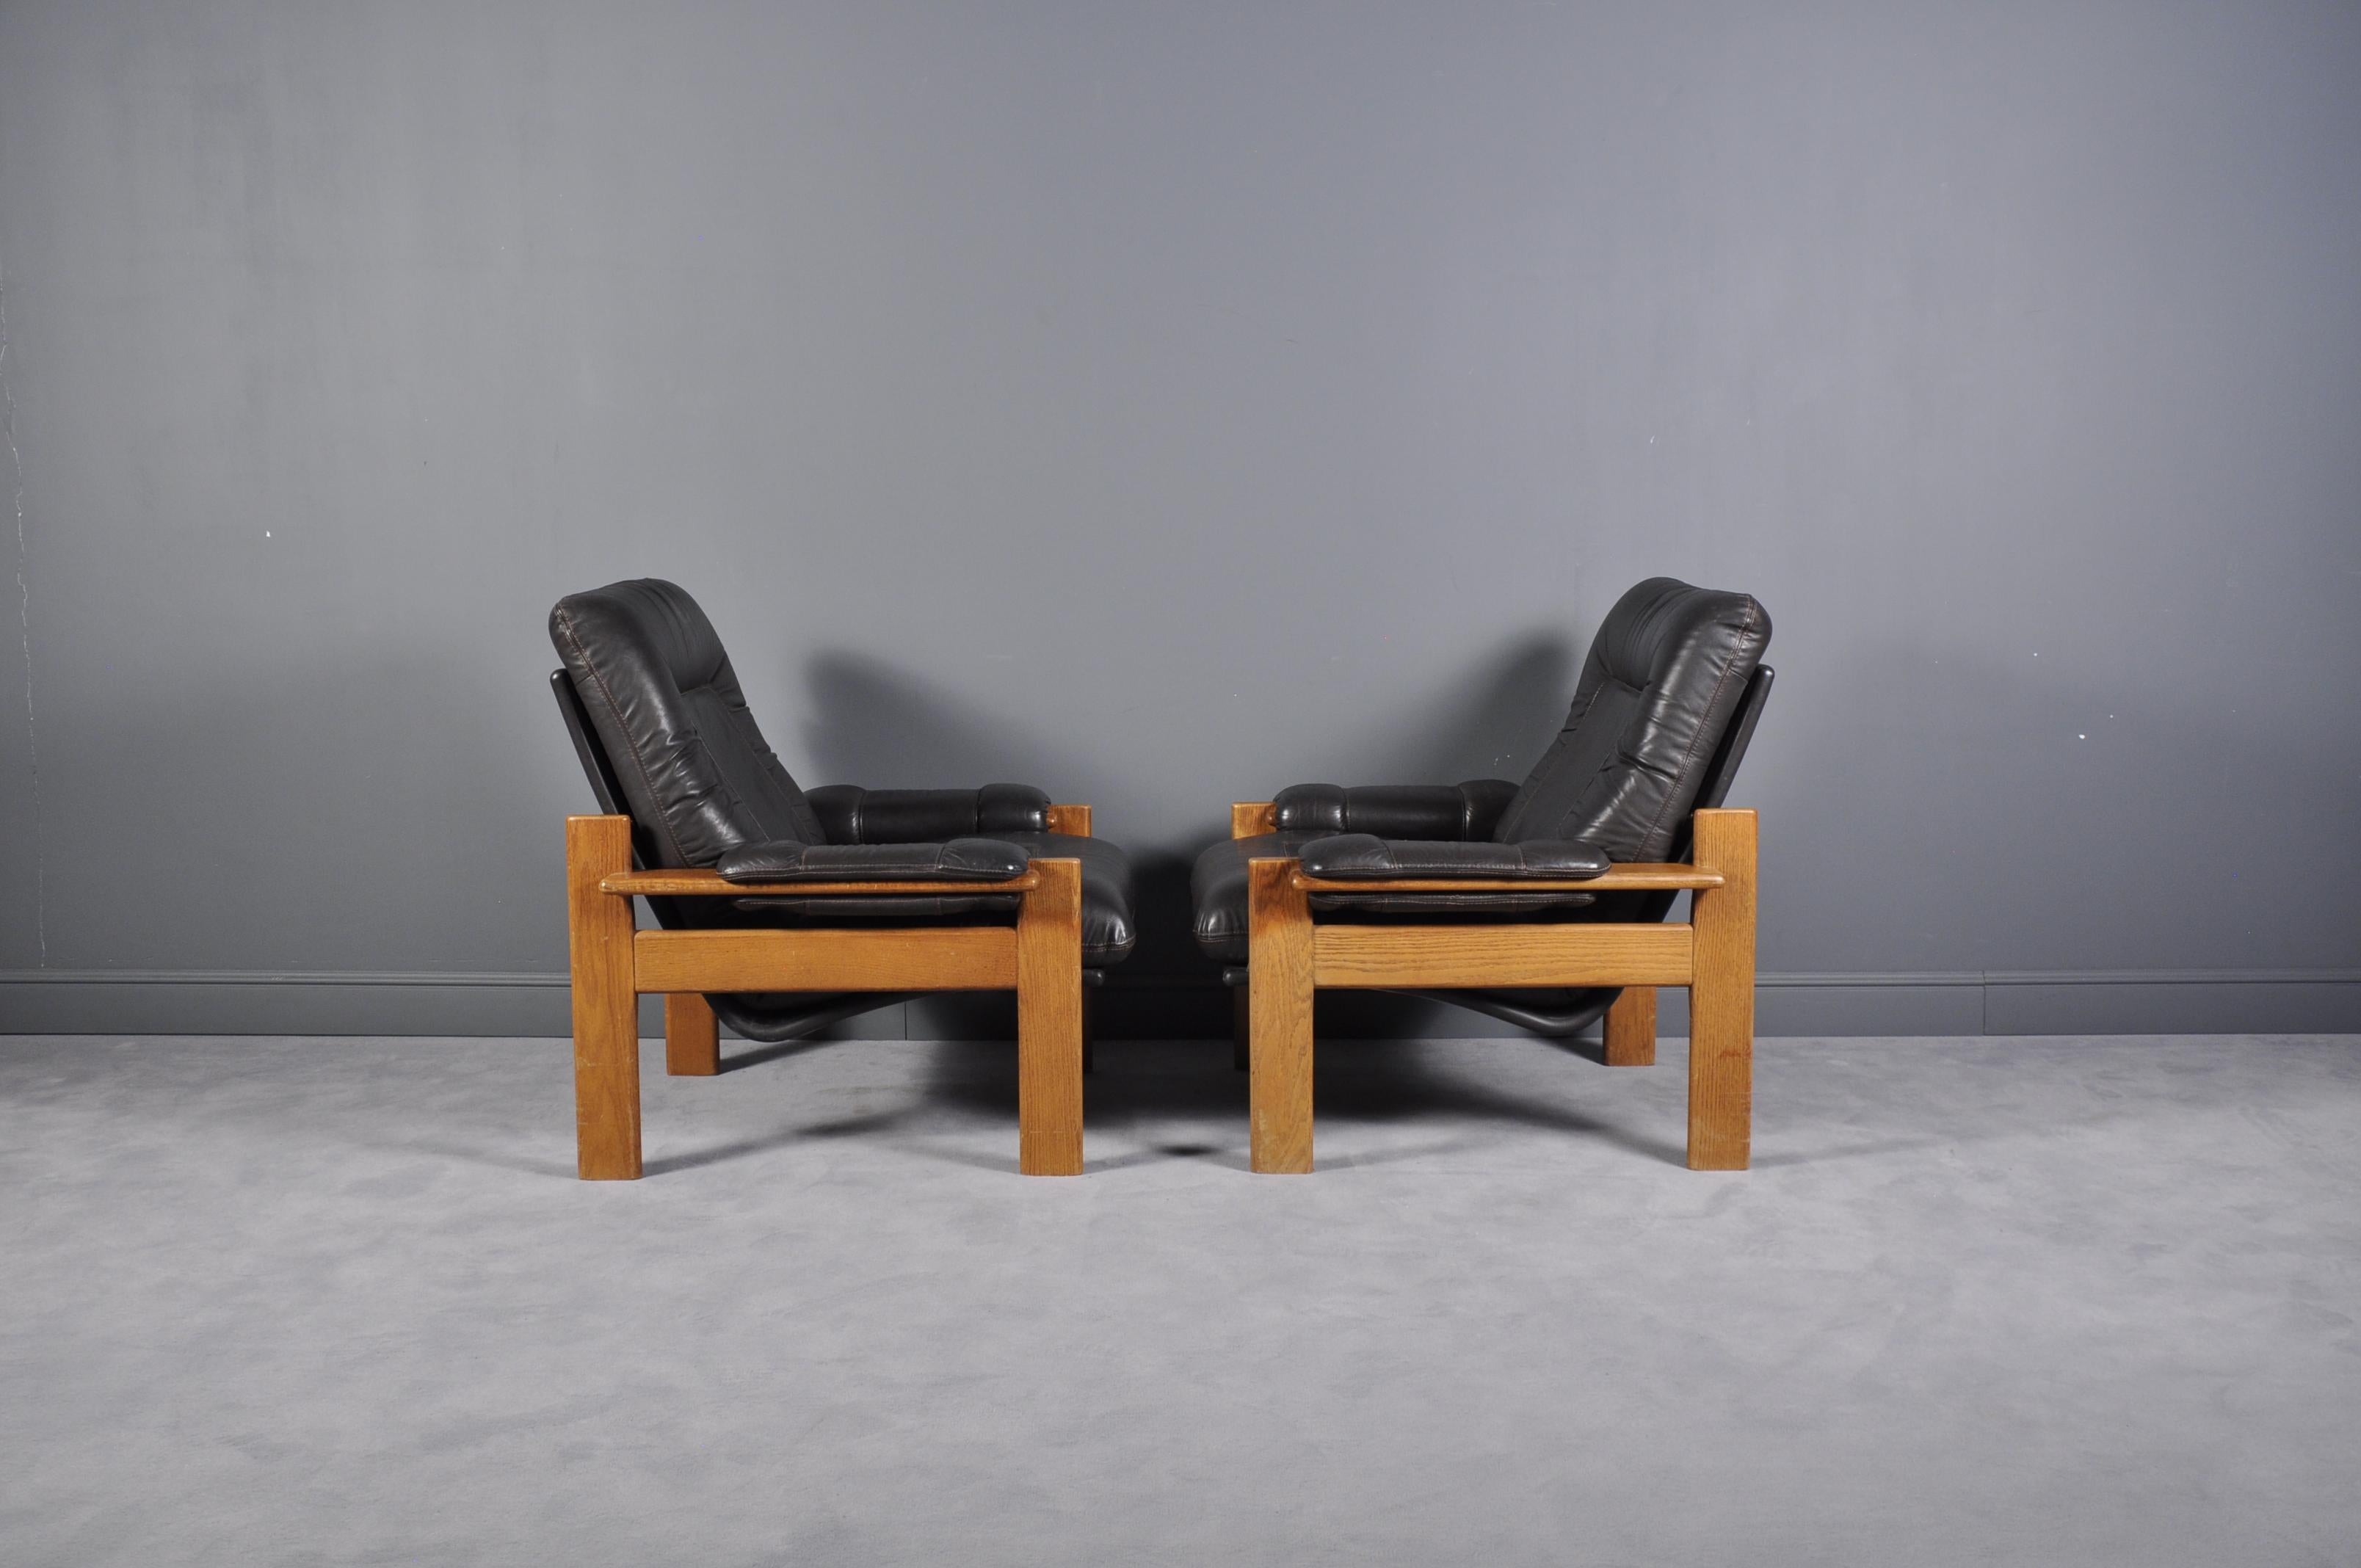 This set of easy chairs features a teak frame with a black leather seat and back. The chairs have a sturdy frame showing refined craftsmanship, holding a comfortable leather shell. The seat and back are well proportioned and provide excellent back